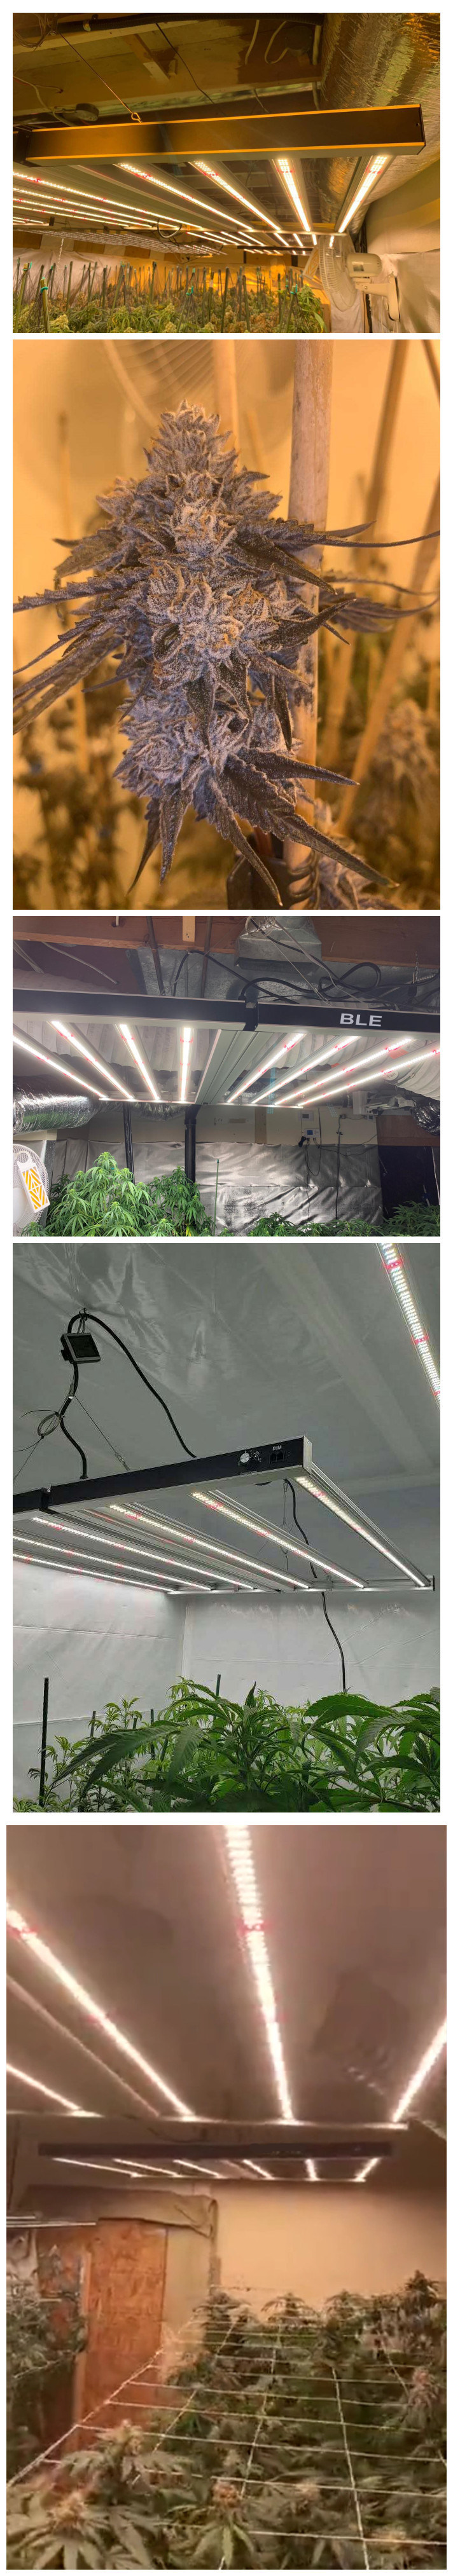 BLE Commercial Project Supply Greenhouse LED Grow Light Samsung Lm301b High Ppfd Dimming Timer Rj14 Intelligent Control